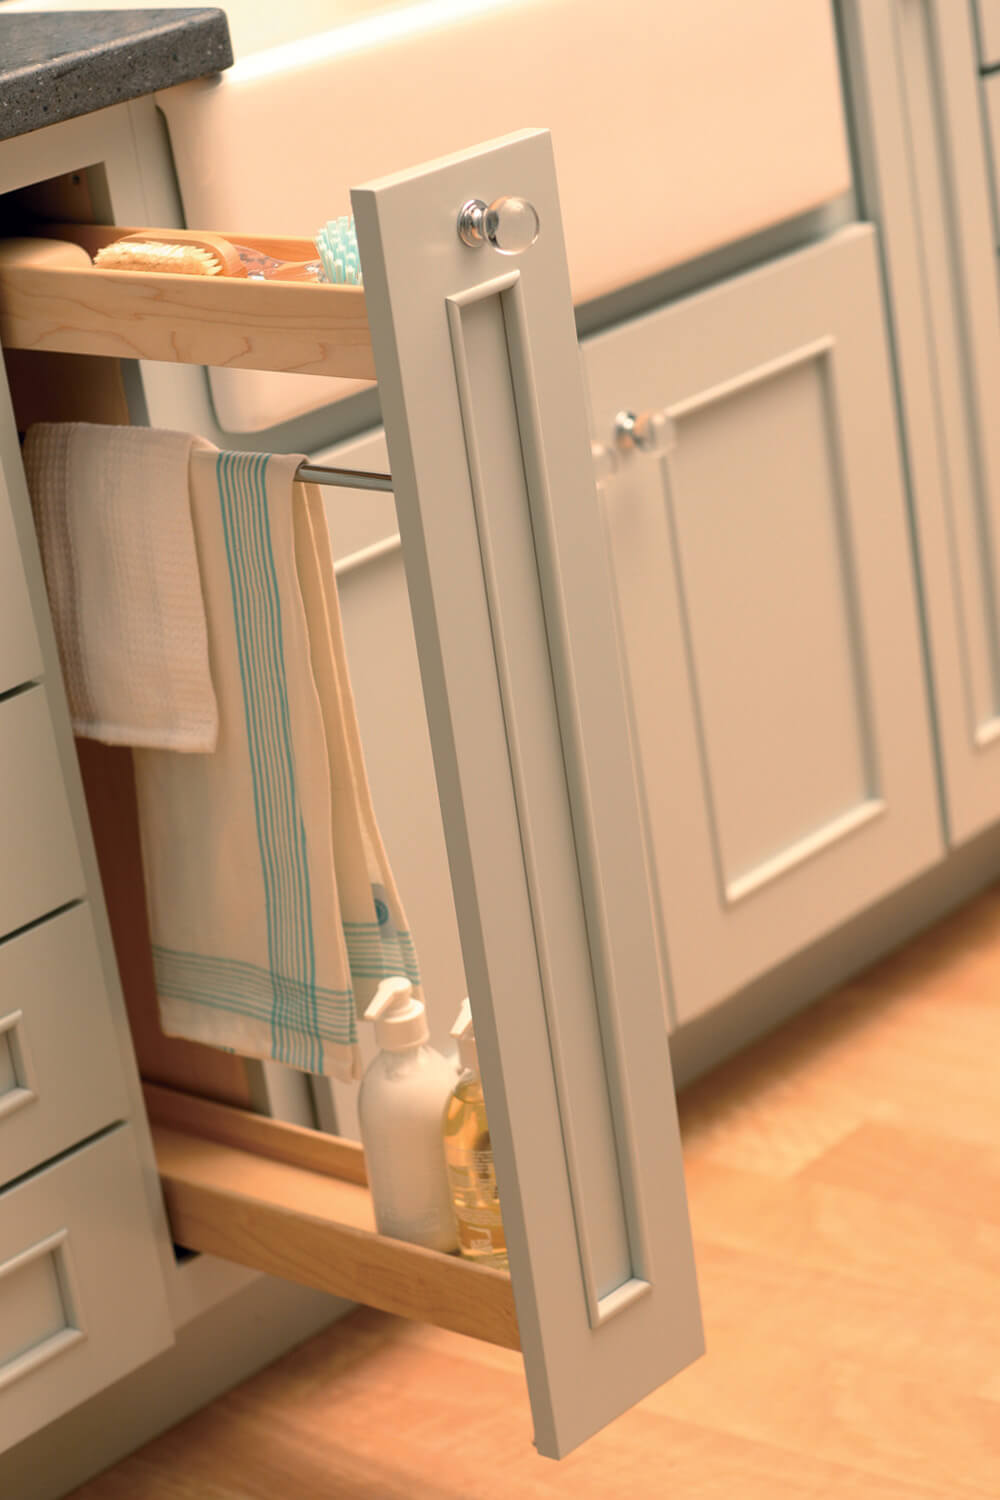 A Pull-Out Towel Bar cabinet by Dura Supreme provides a dedicated space for storing towels, sponges, soaps, and hand-sanitizers next near the sink area.